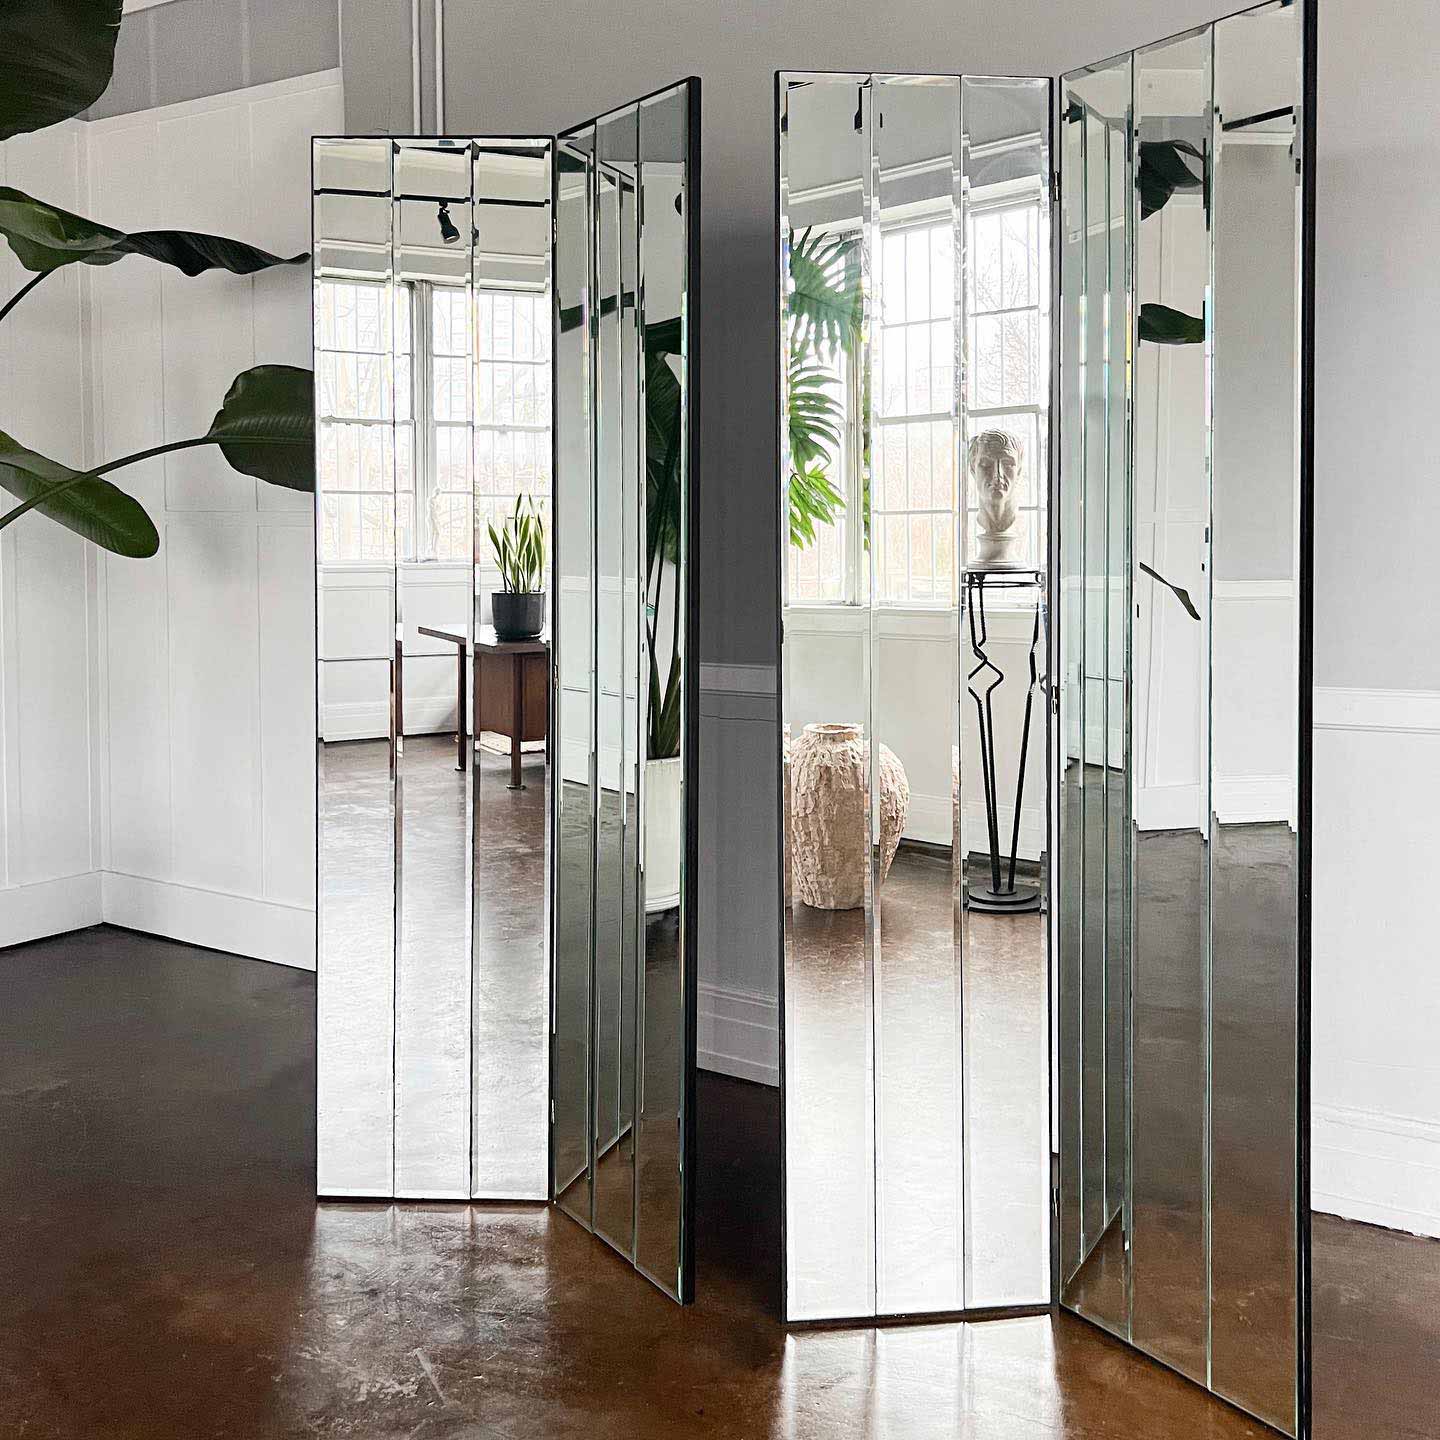 Two-part folding mirror room divider